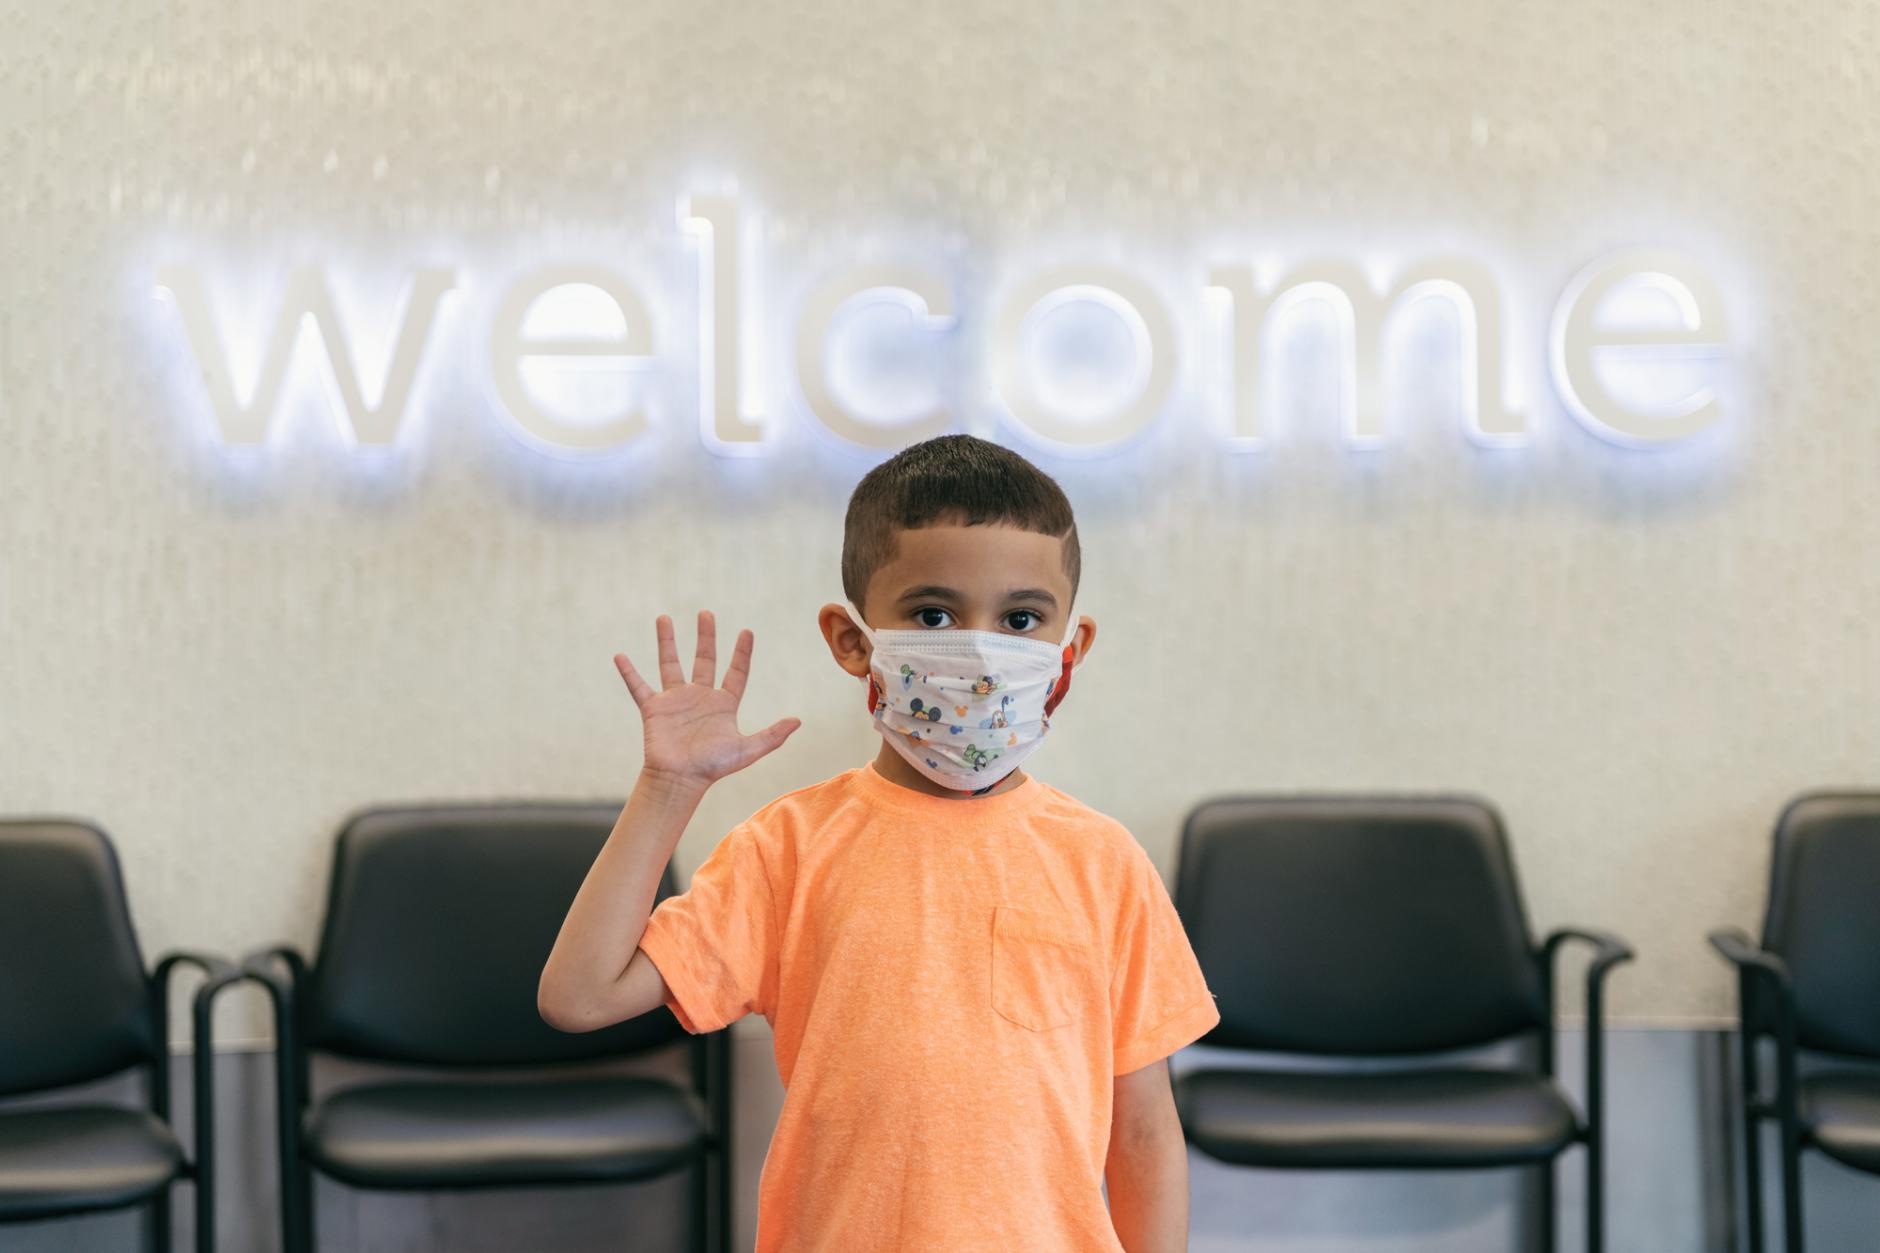 Boy wearing face mask waives at camera while standing in front of "welcome" sign